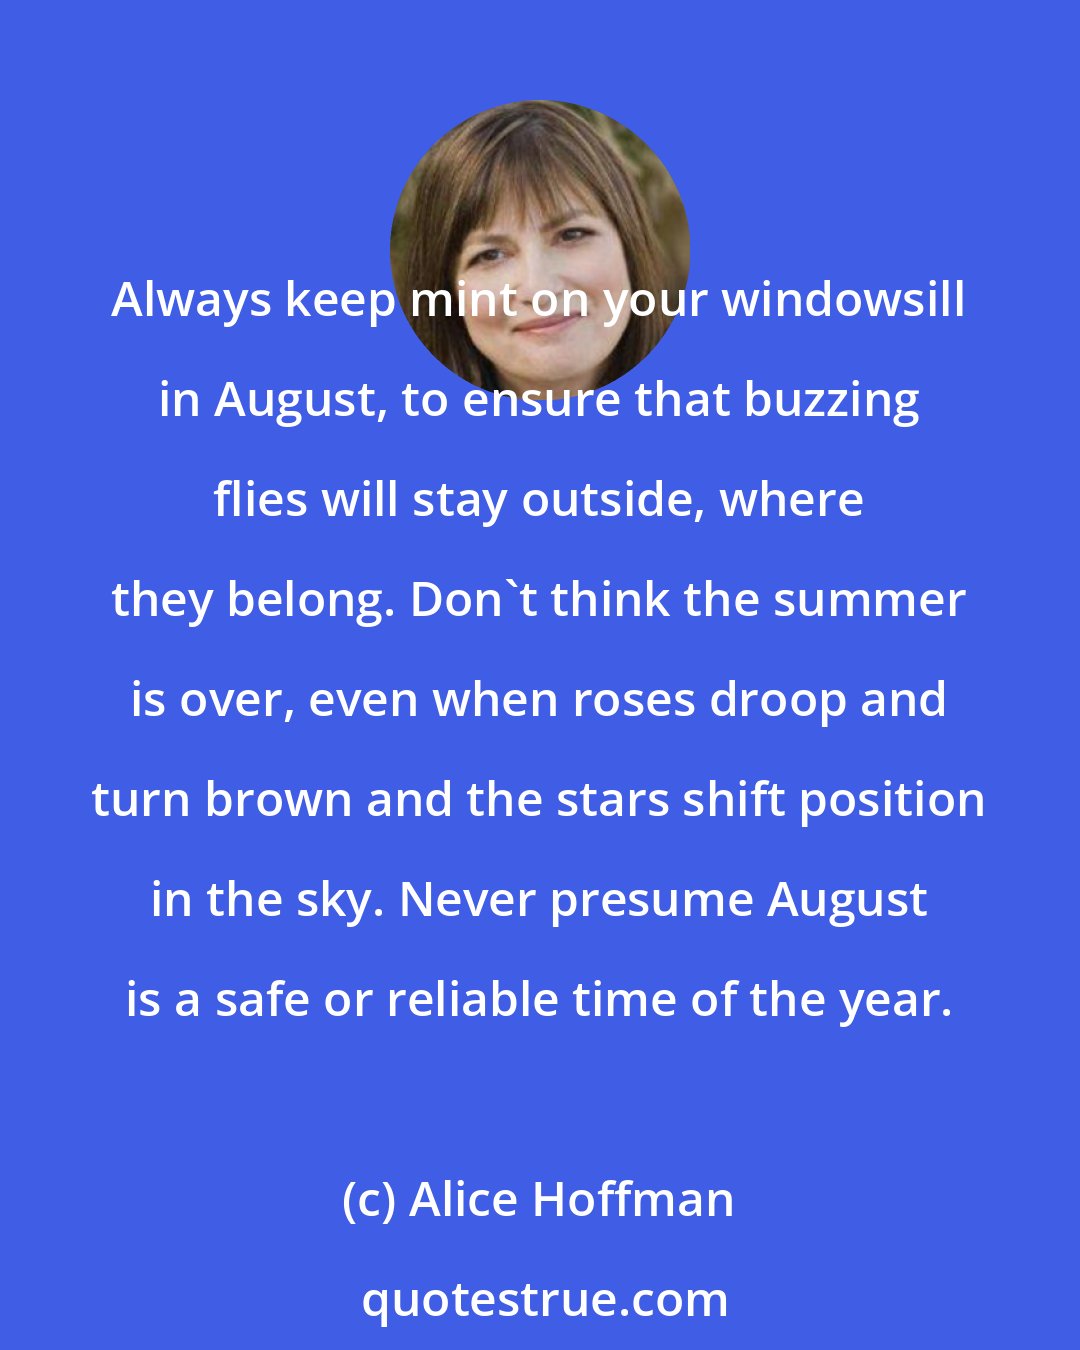 Alice Hoffman: Always keep mint on your windowsill in August, to ensure that buzzing flies will stay outside, where they belong. Don't think the summer is over, even when roses droop and turn brown and the stars shift position in the sky. Never presume August is a safe or reliable time of the year.